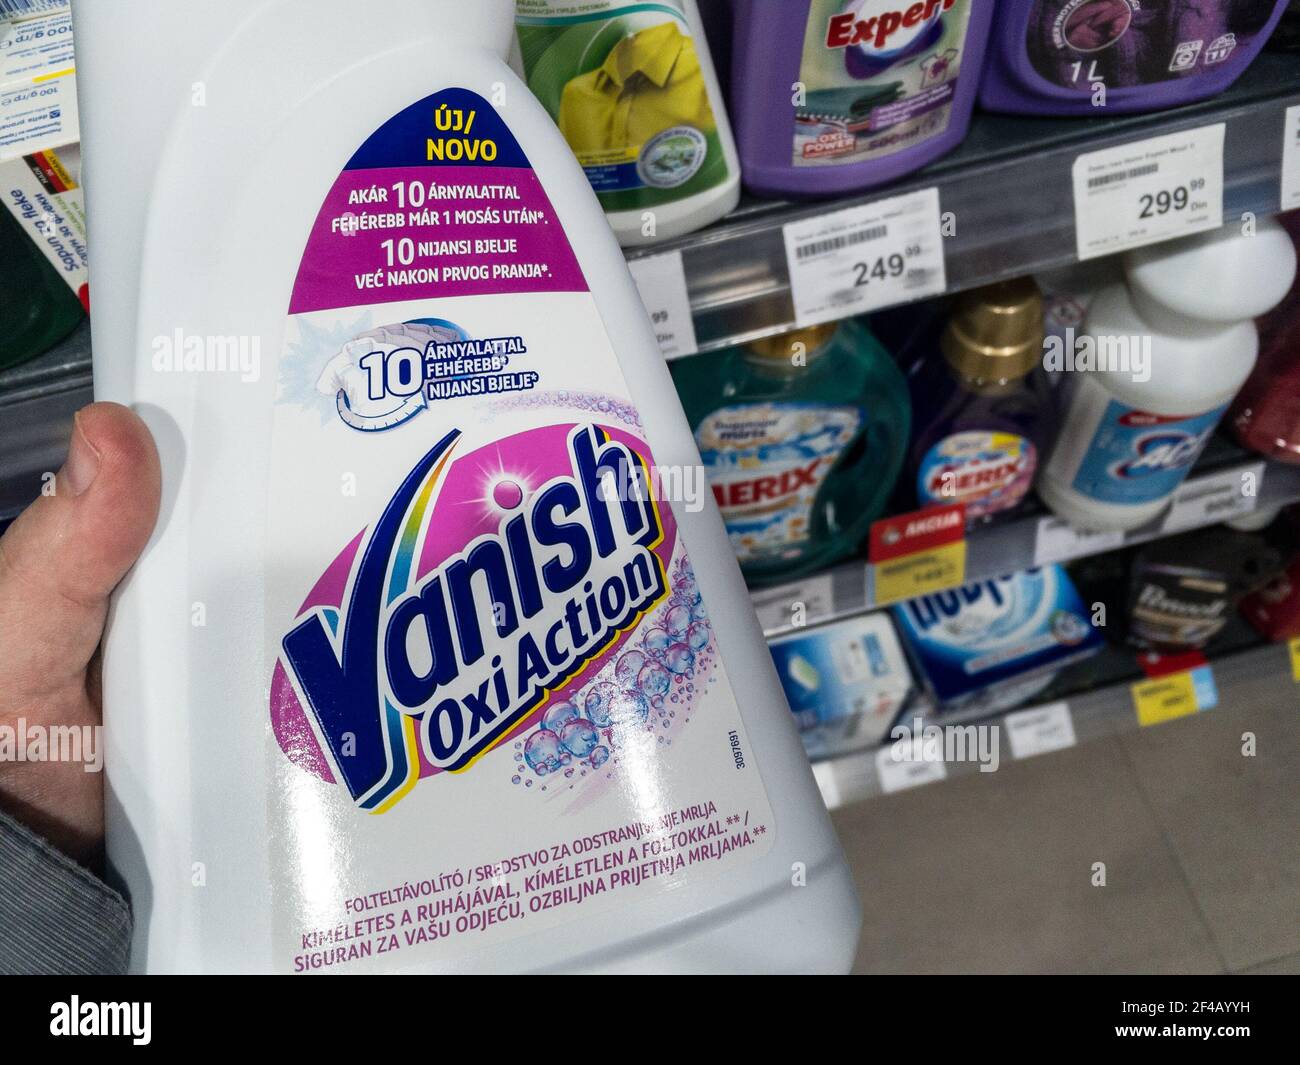 https://c8.alamy.com/comp/2F4AYYH/belgrade-serbia-march-18-2021-vanish-oxi-action-logo-on-a-detergent-bottle-for-sale-in-belgrade-vanish-is-a-brand-stain-remover-detergent-cleani-2F4AYYH.jpg